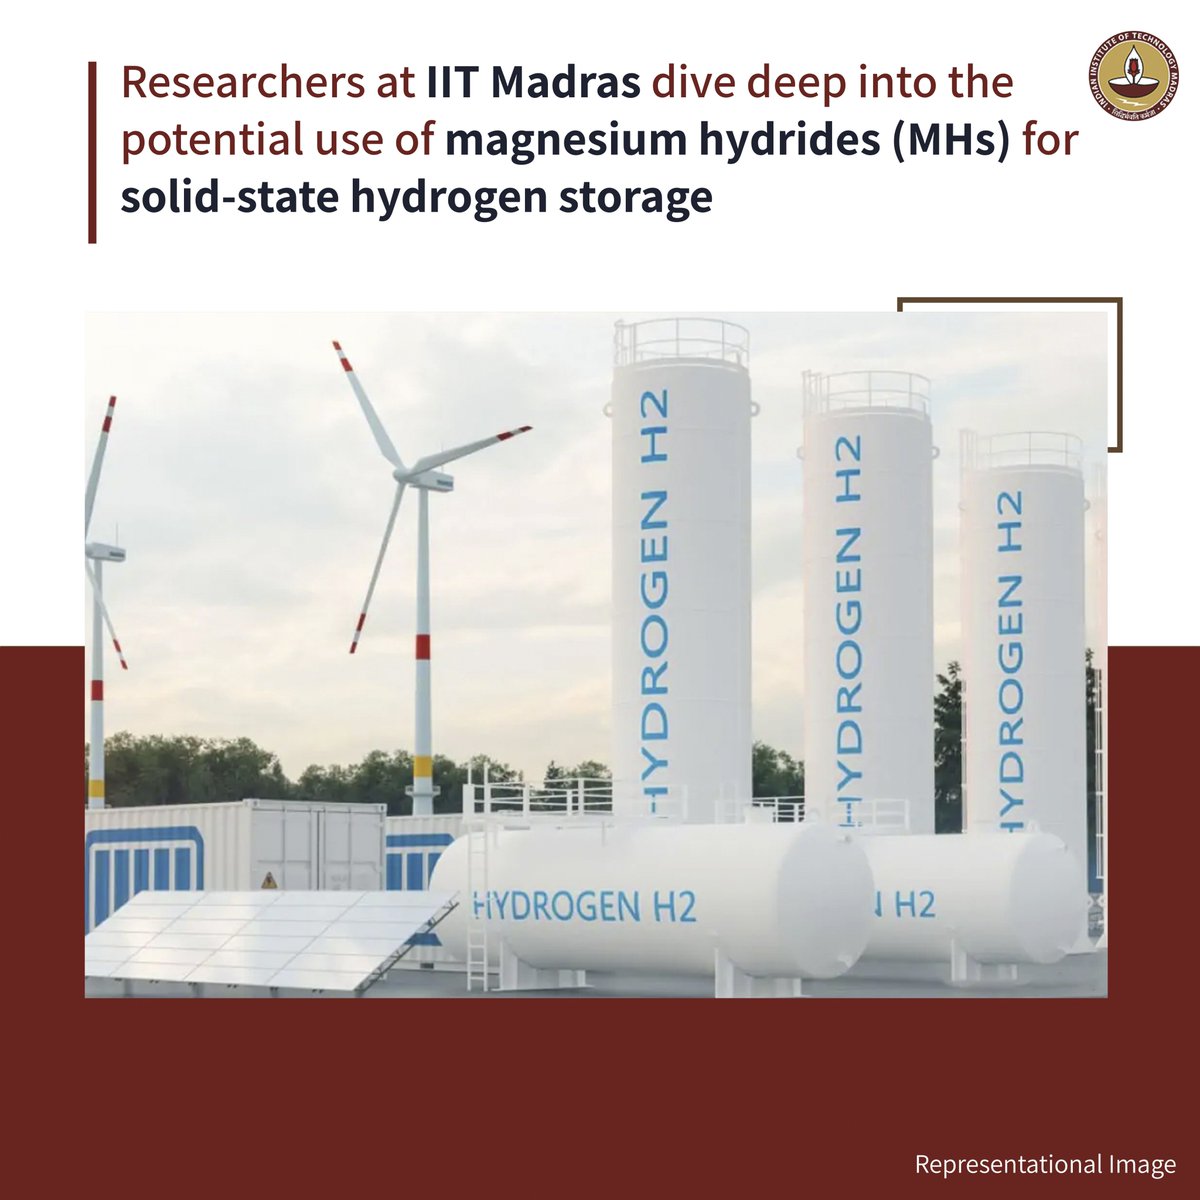 #Techtuesday Researchers at @iitmadras dive deep into the world of finer hydrogen #storage with groundbreaking #research on the exciting potential of magnesium hydrides (MHs) for solid-state hydrogen storage.

Read the full article here: tech-talk.iitm.ac.in/finer-hydrogen…

#CleanEnergy